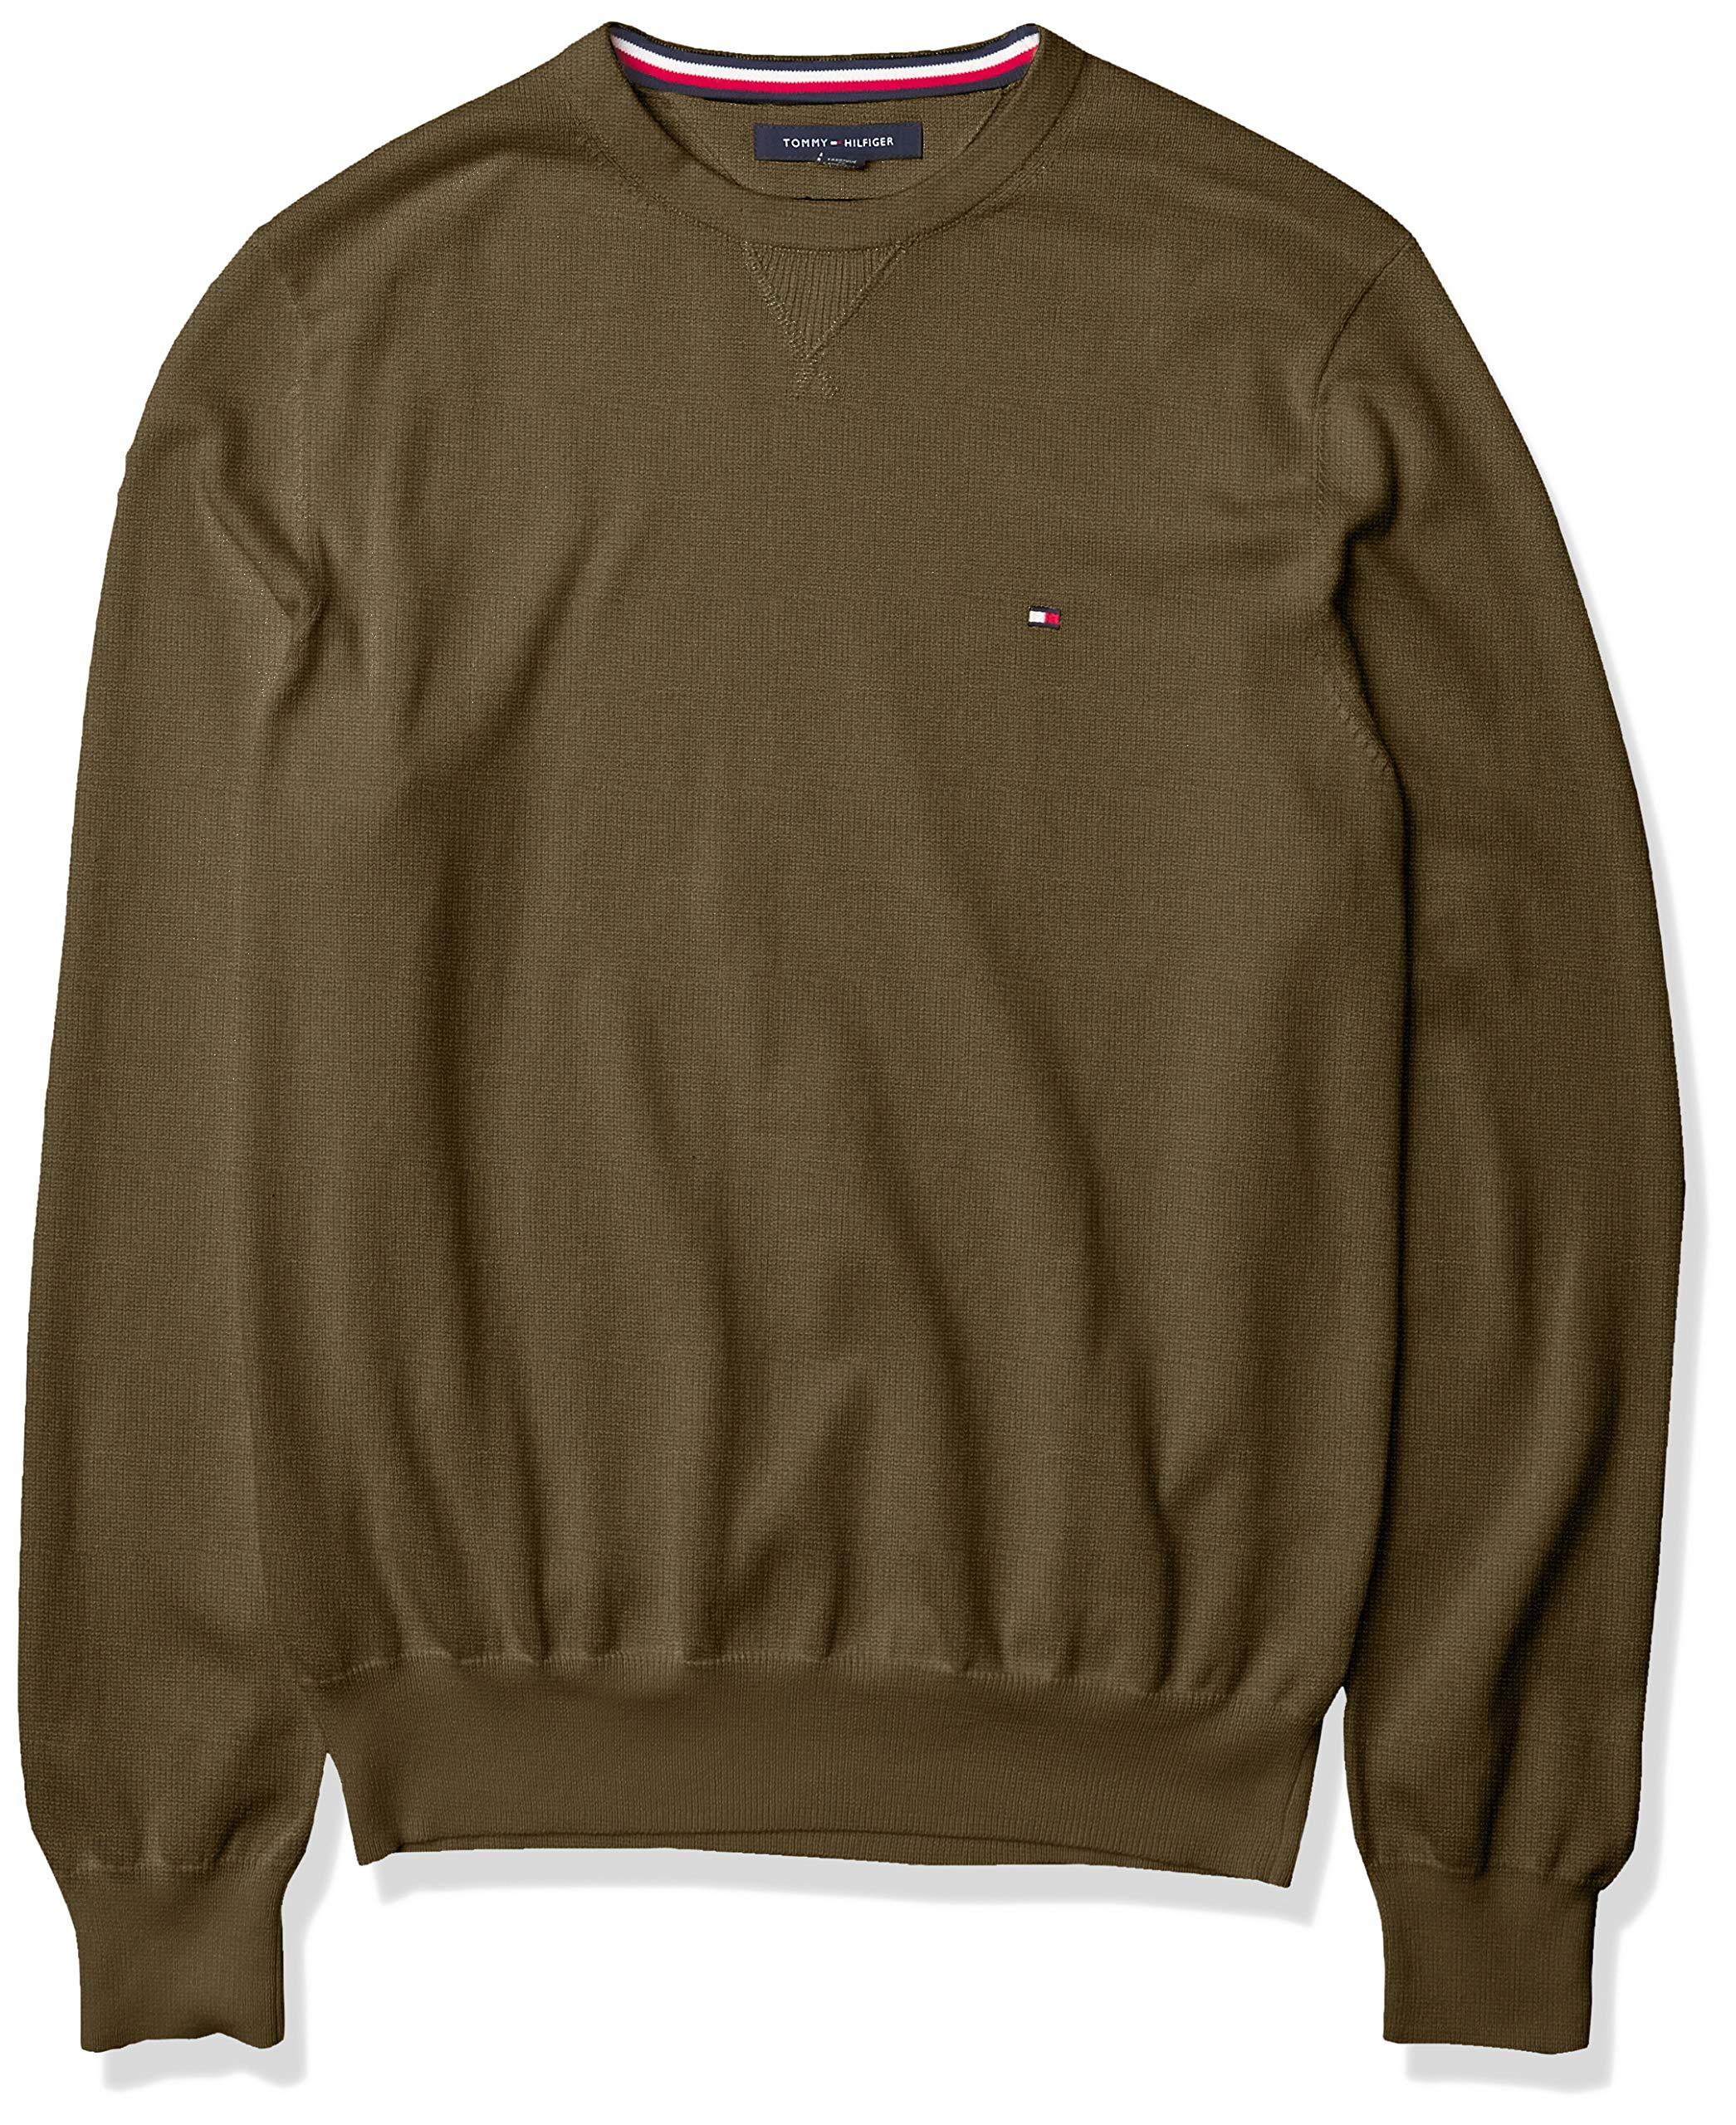 Tommy Hilfiger Solid Crewneck Sweater in Army Green (Green) for Men - Lyst